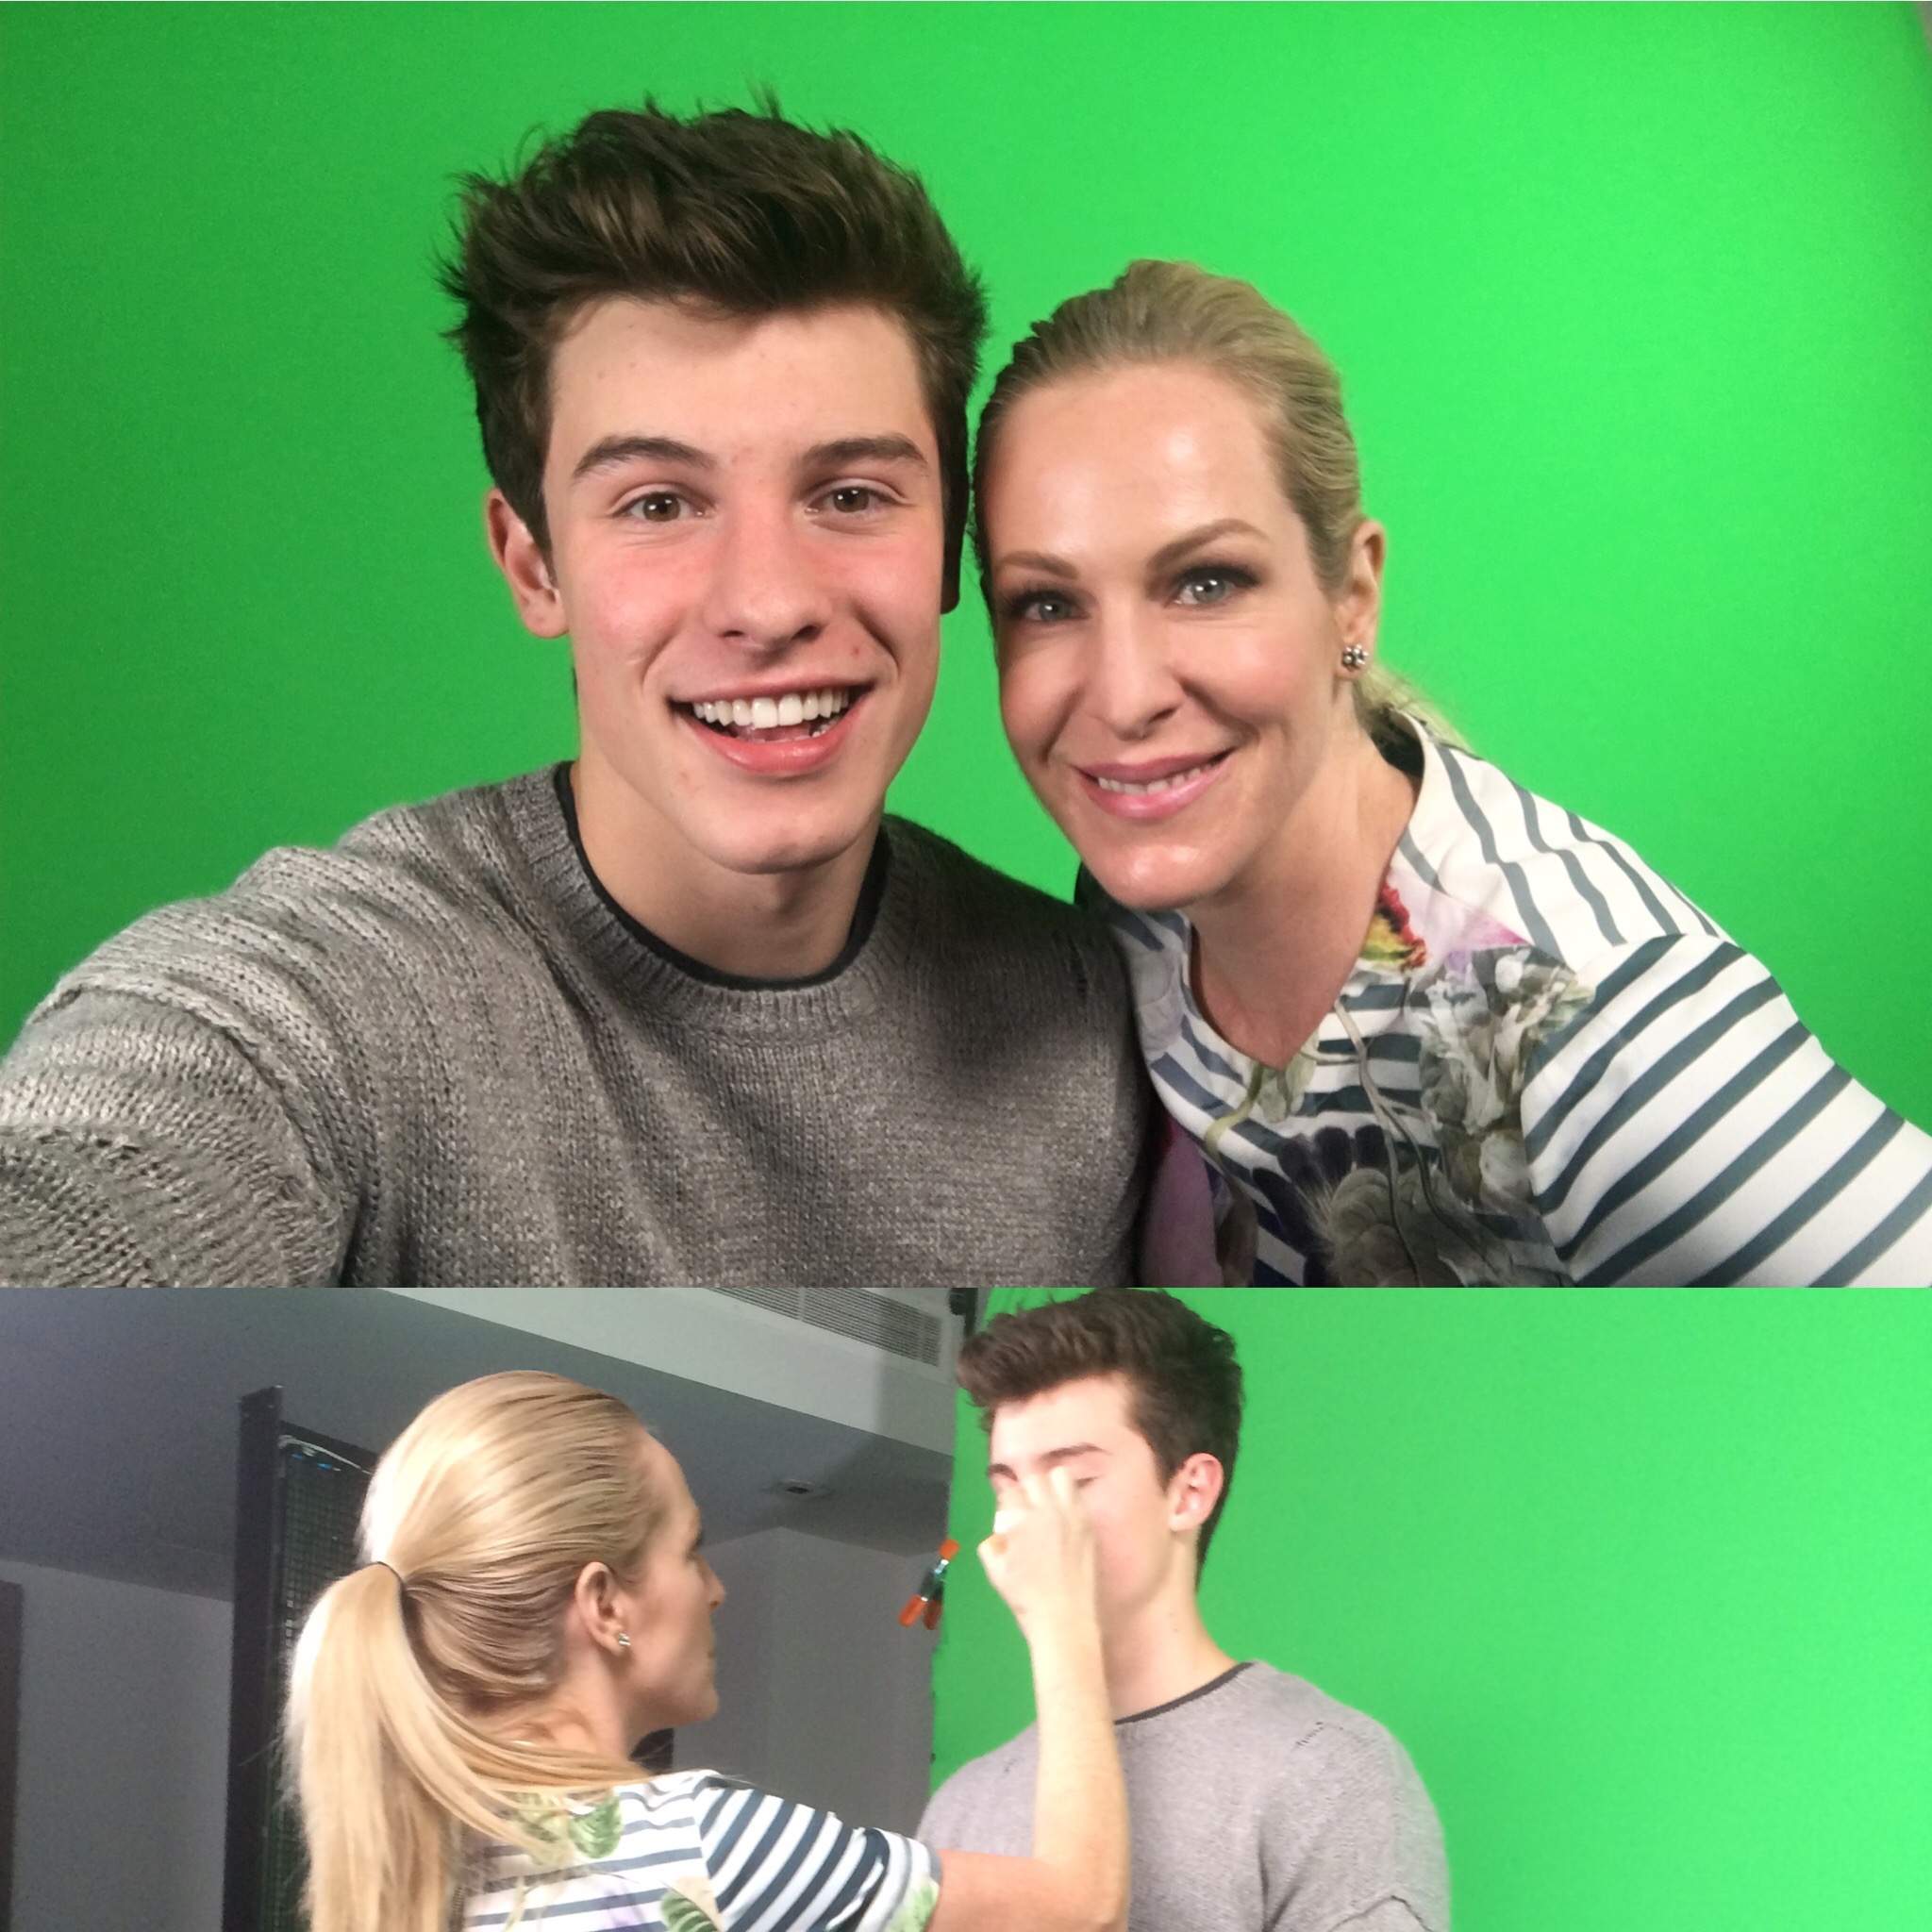 Makeup Artist for Music Artists - Shawn Mendes